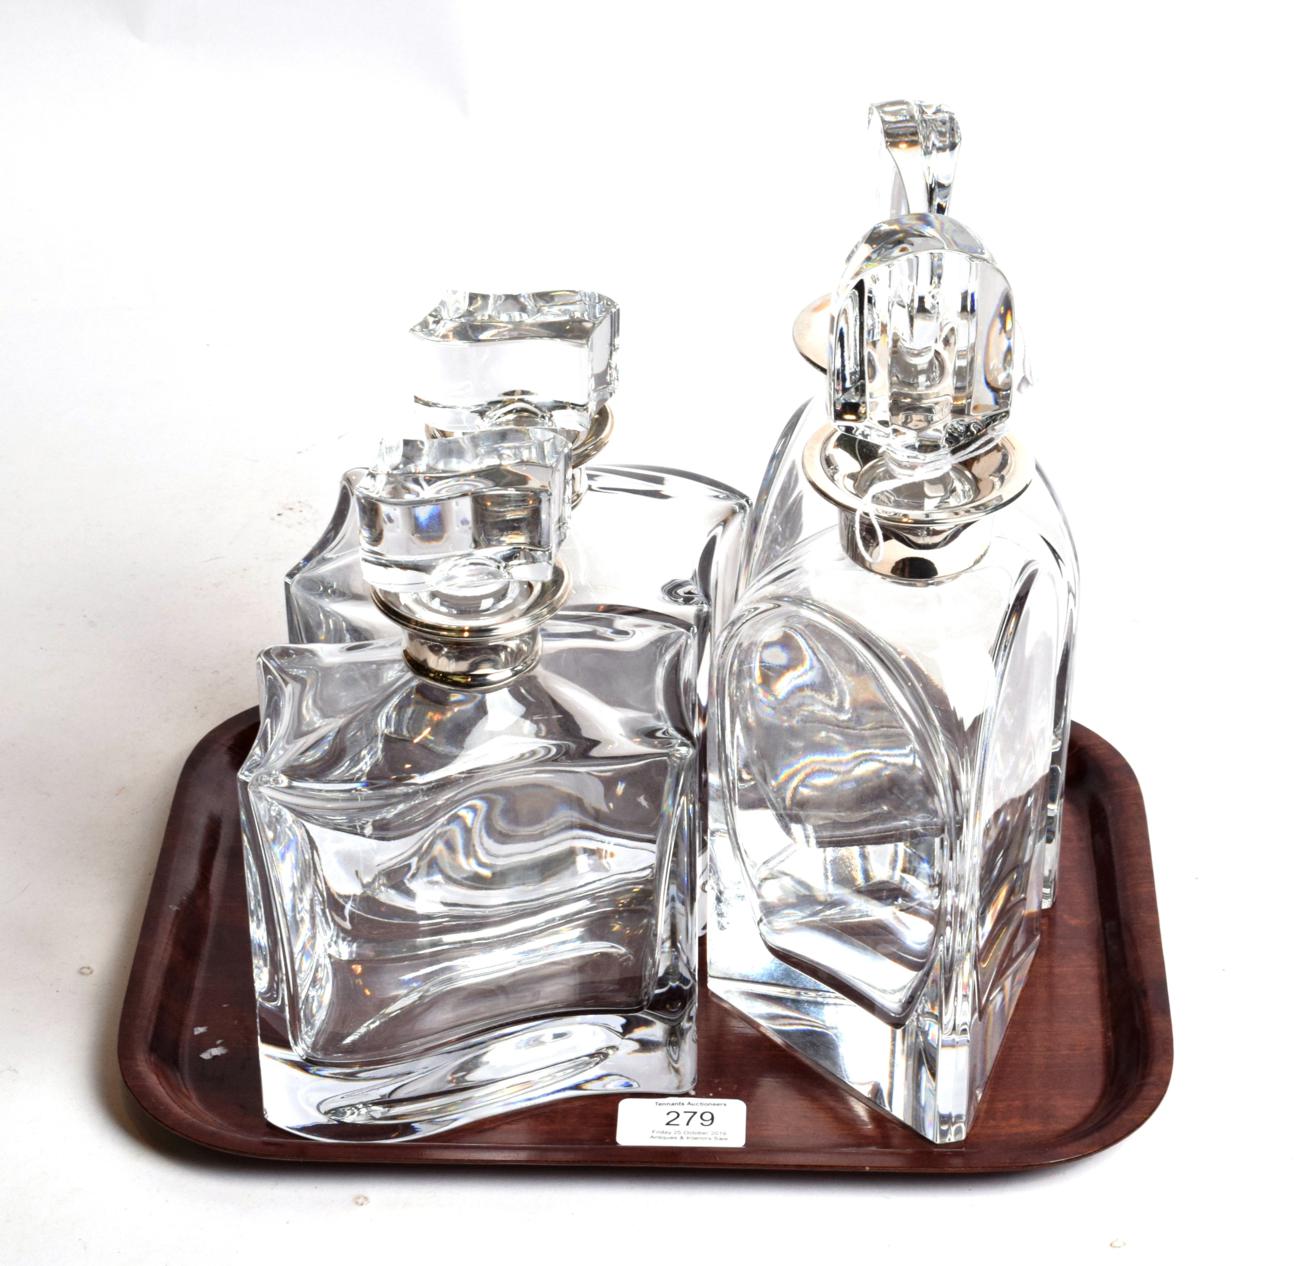 Lot 279 - A pair of Elizabeth II silver-mounted Bohemian glass decanters, the mounts by Laurence R....